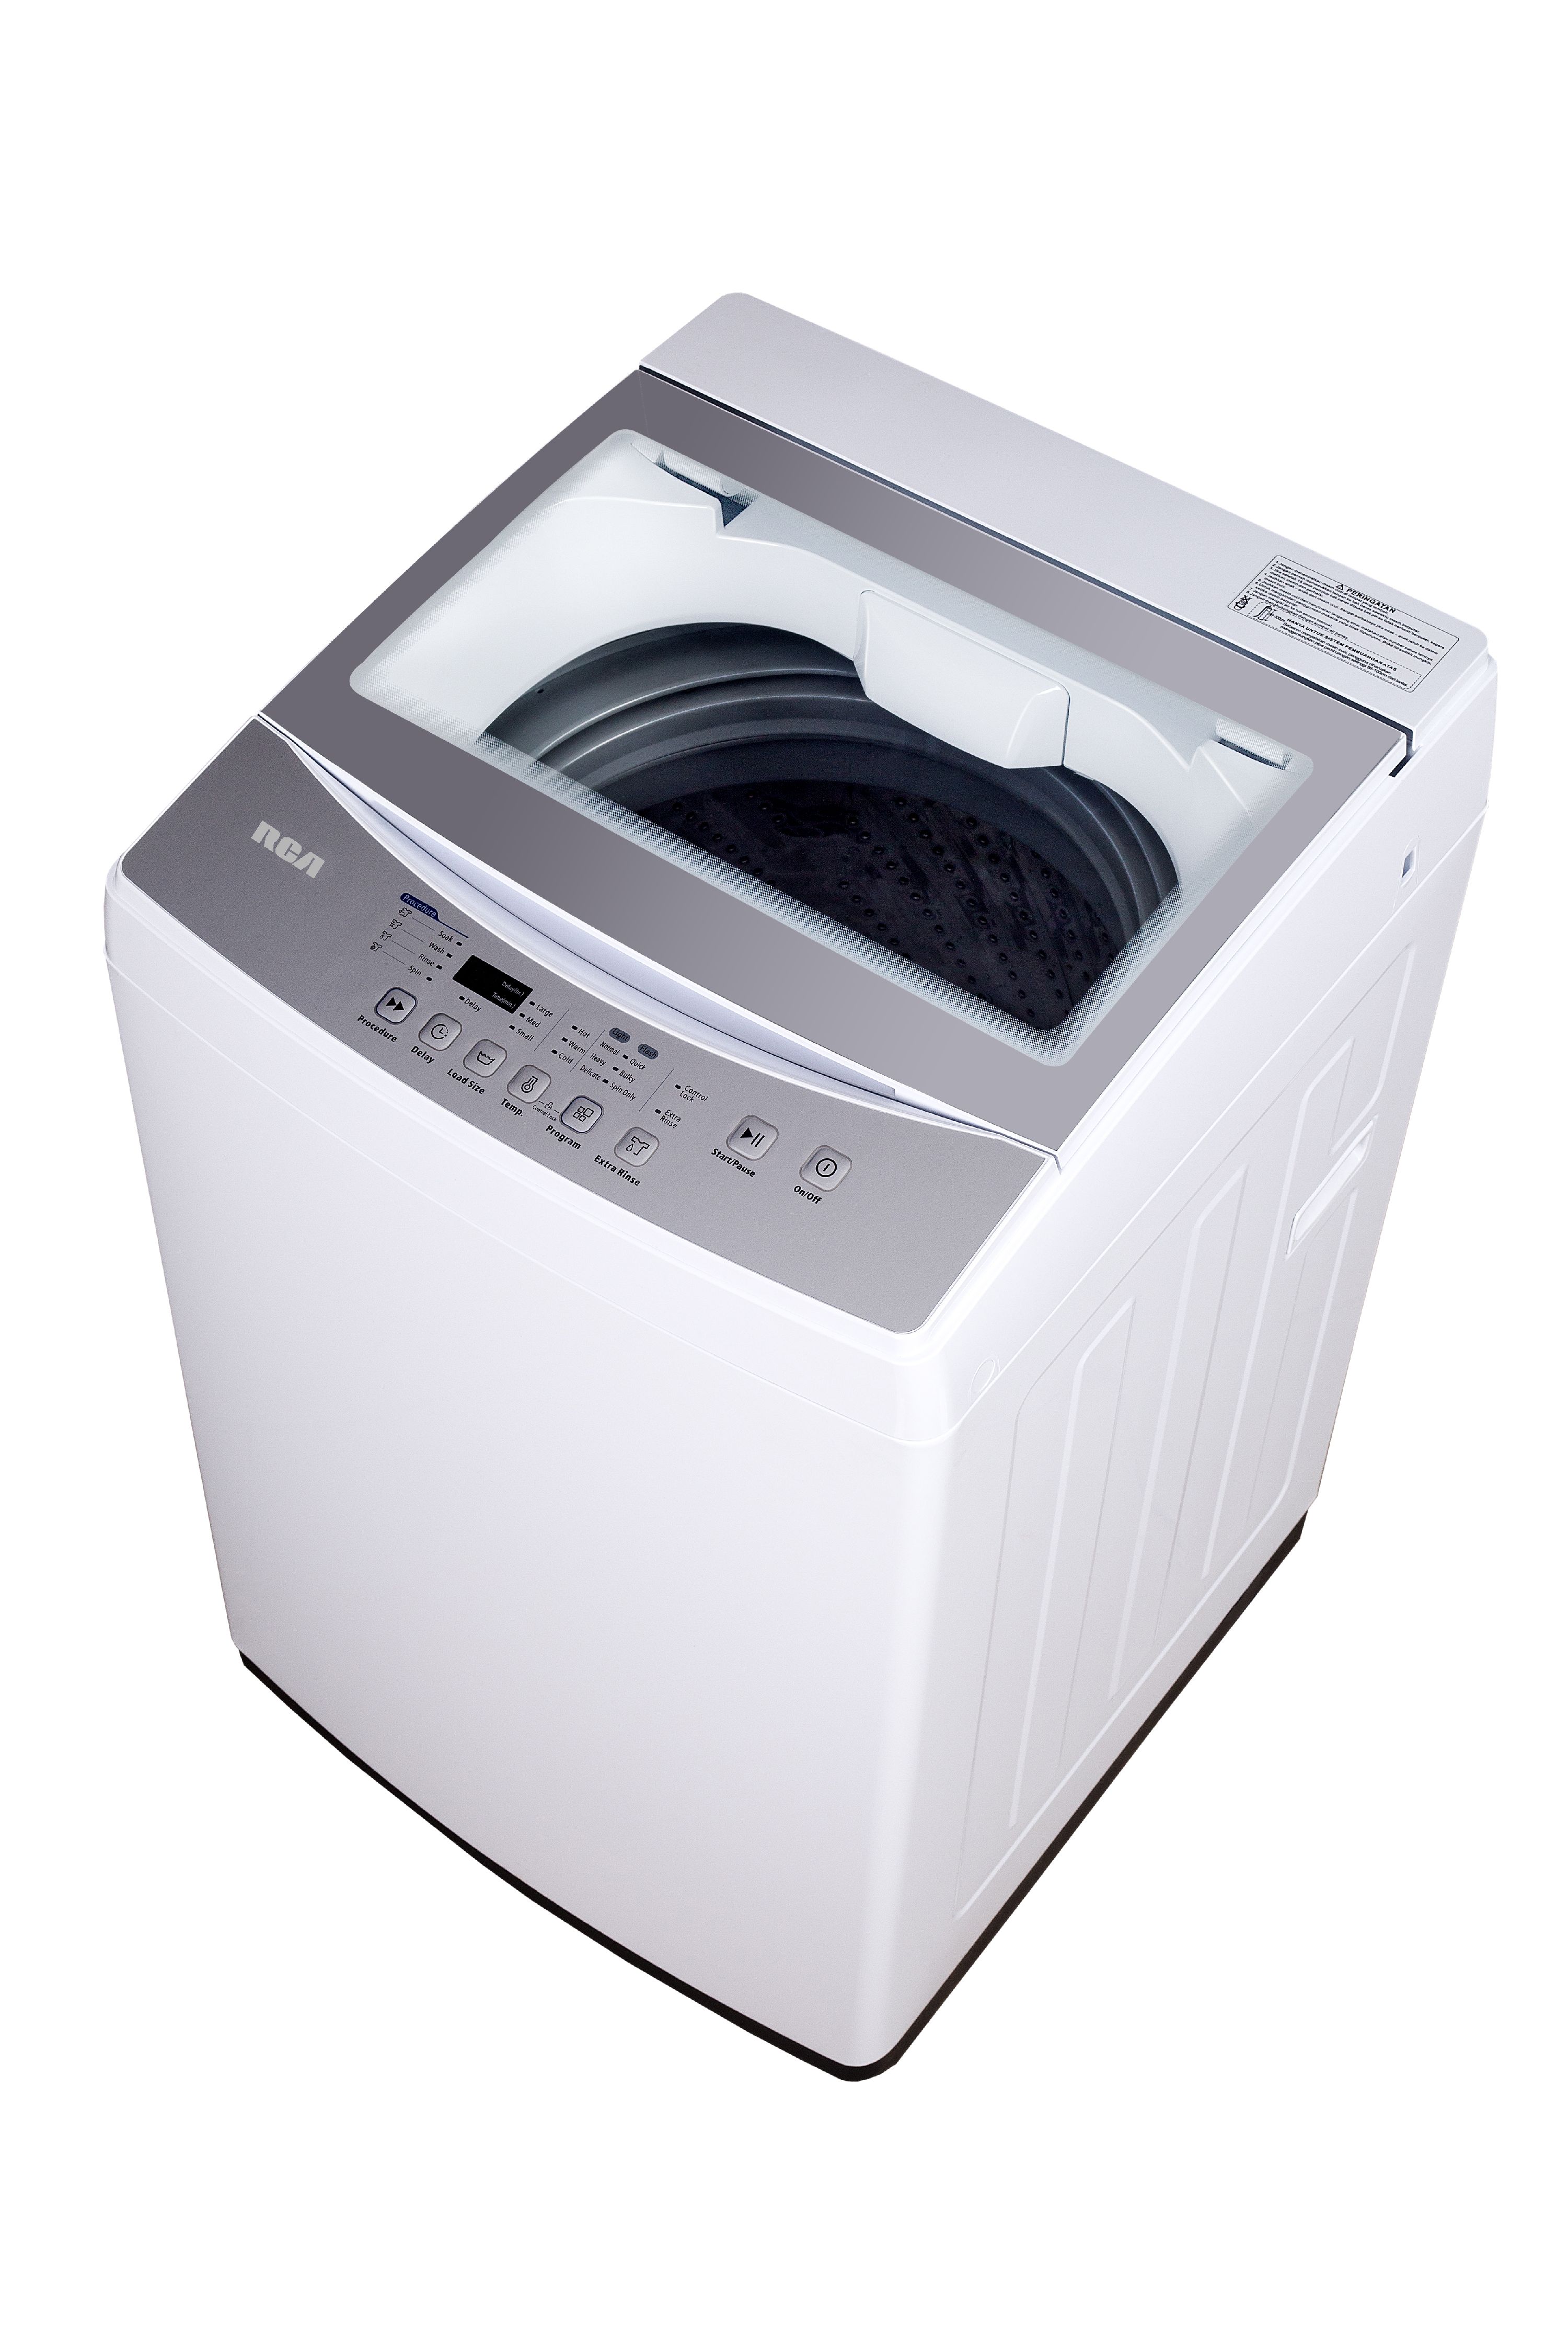 RCA 2.0 Cu. Ft. Portable Washer RPW210, White - image 1 of 8